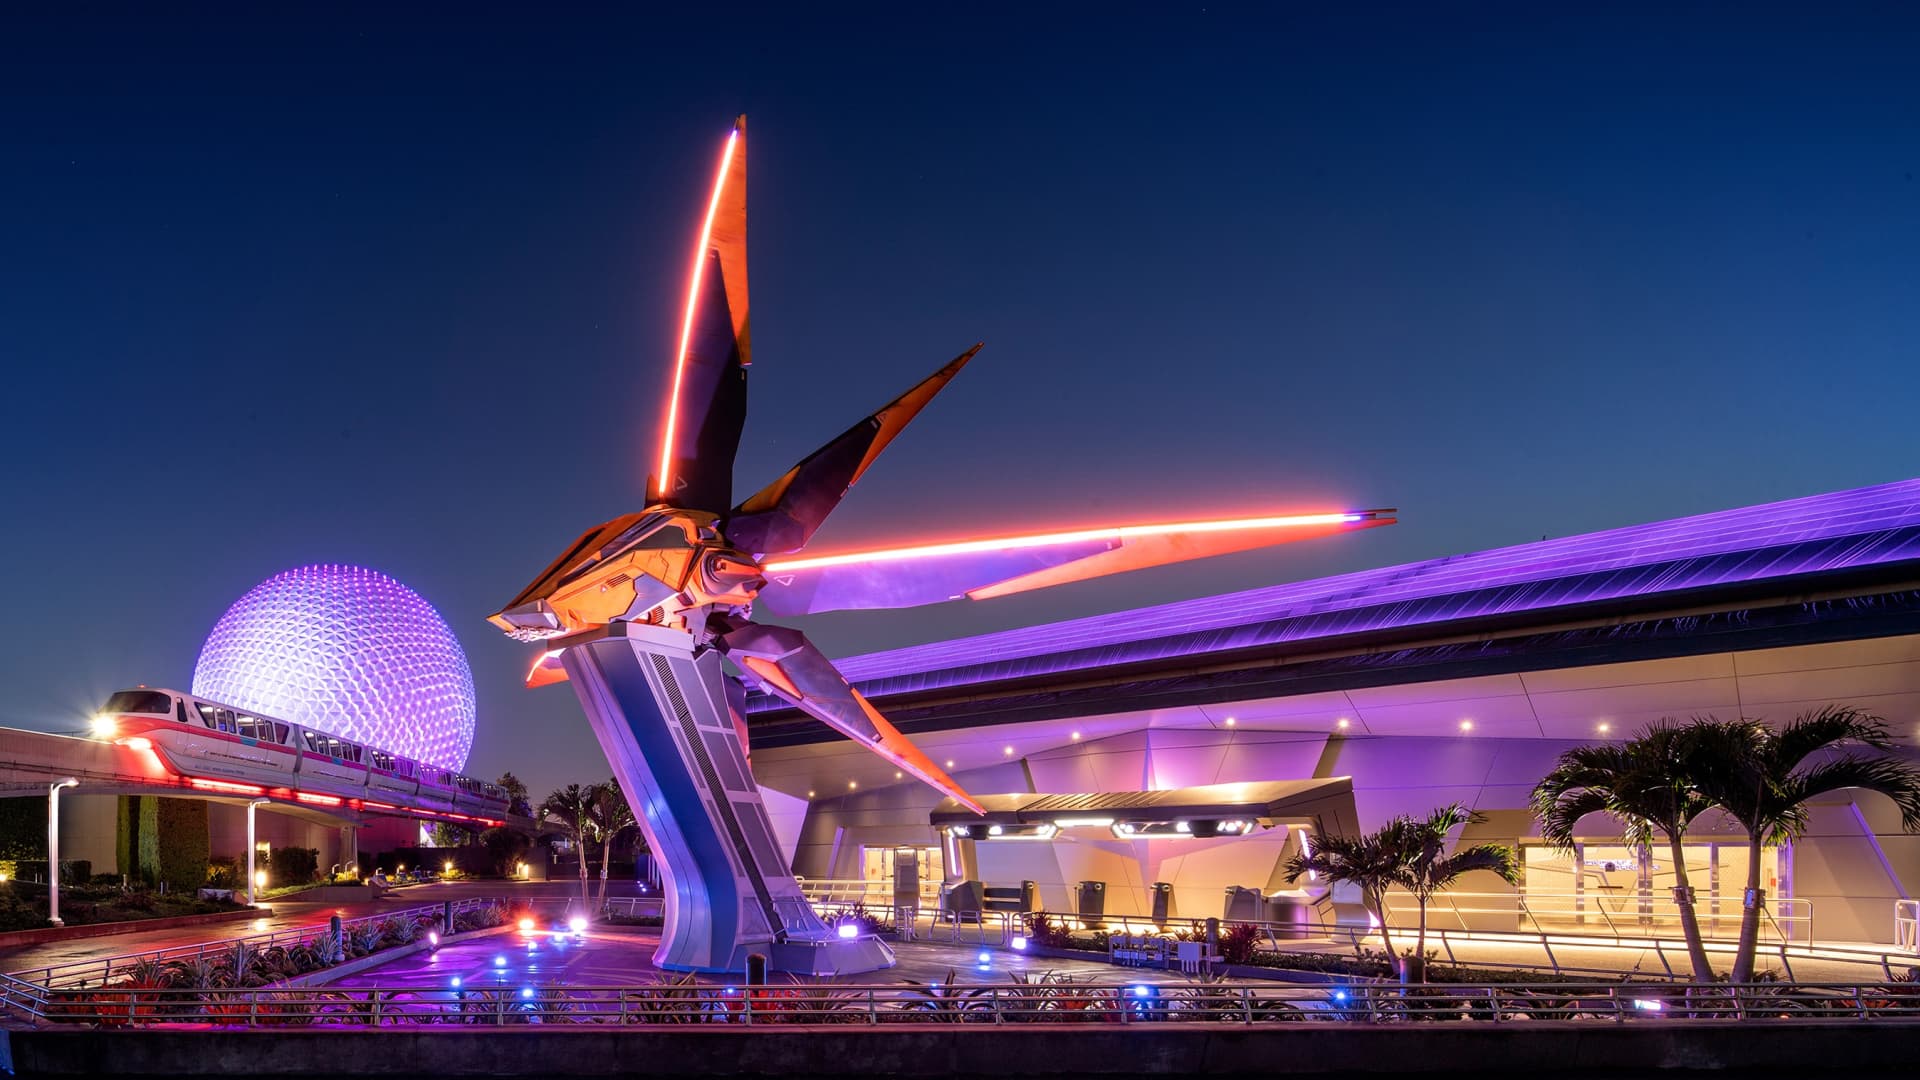 The former Universe of Energy Pavilion is now the Wonders of Xandar Pavilion, home to Guardians of the Galaxy: Cosmic Rewind.